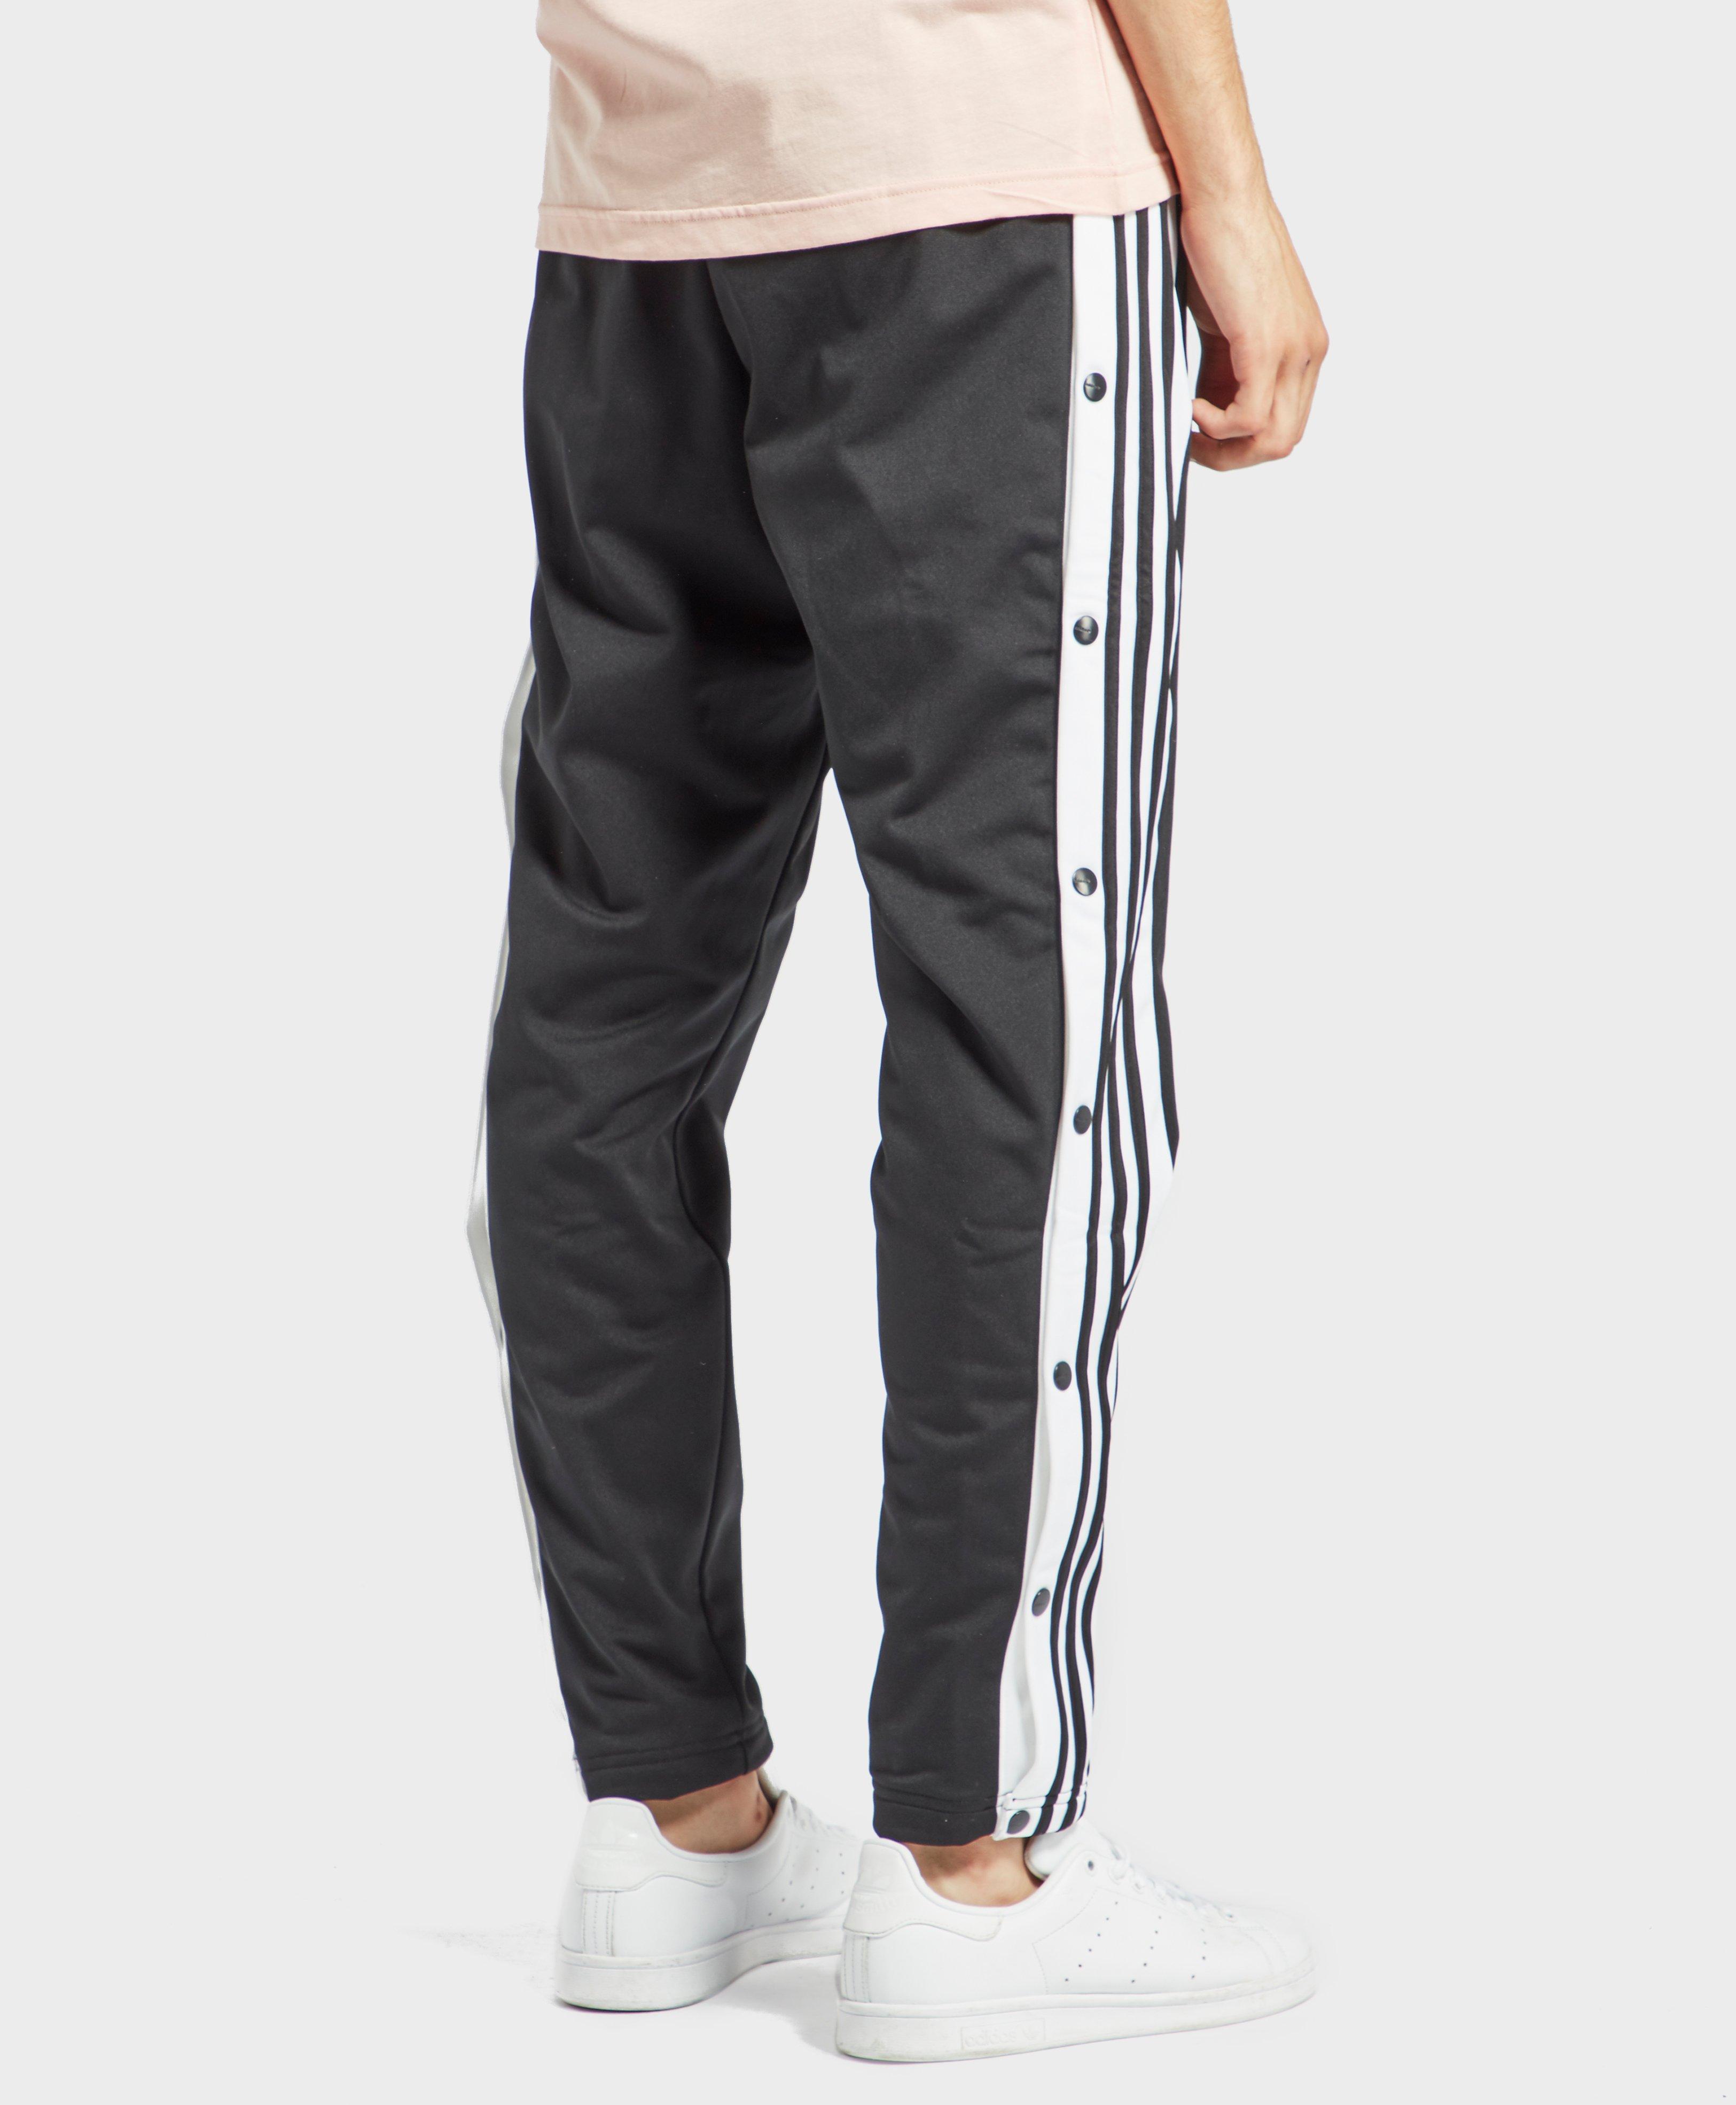 adidas poppers mens